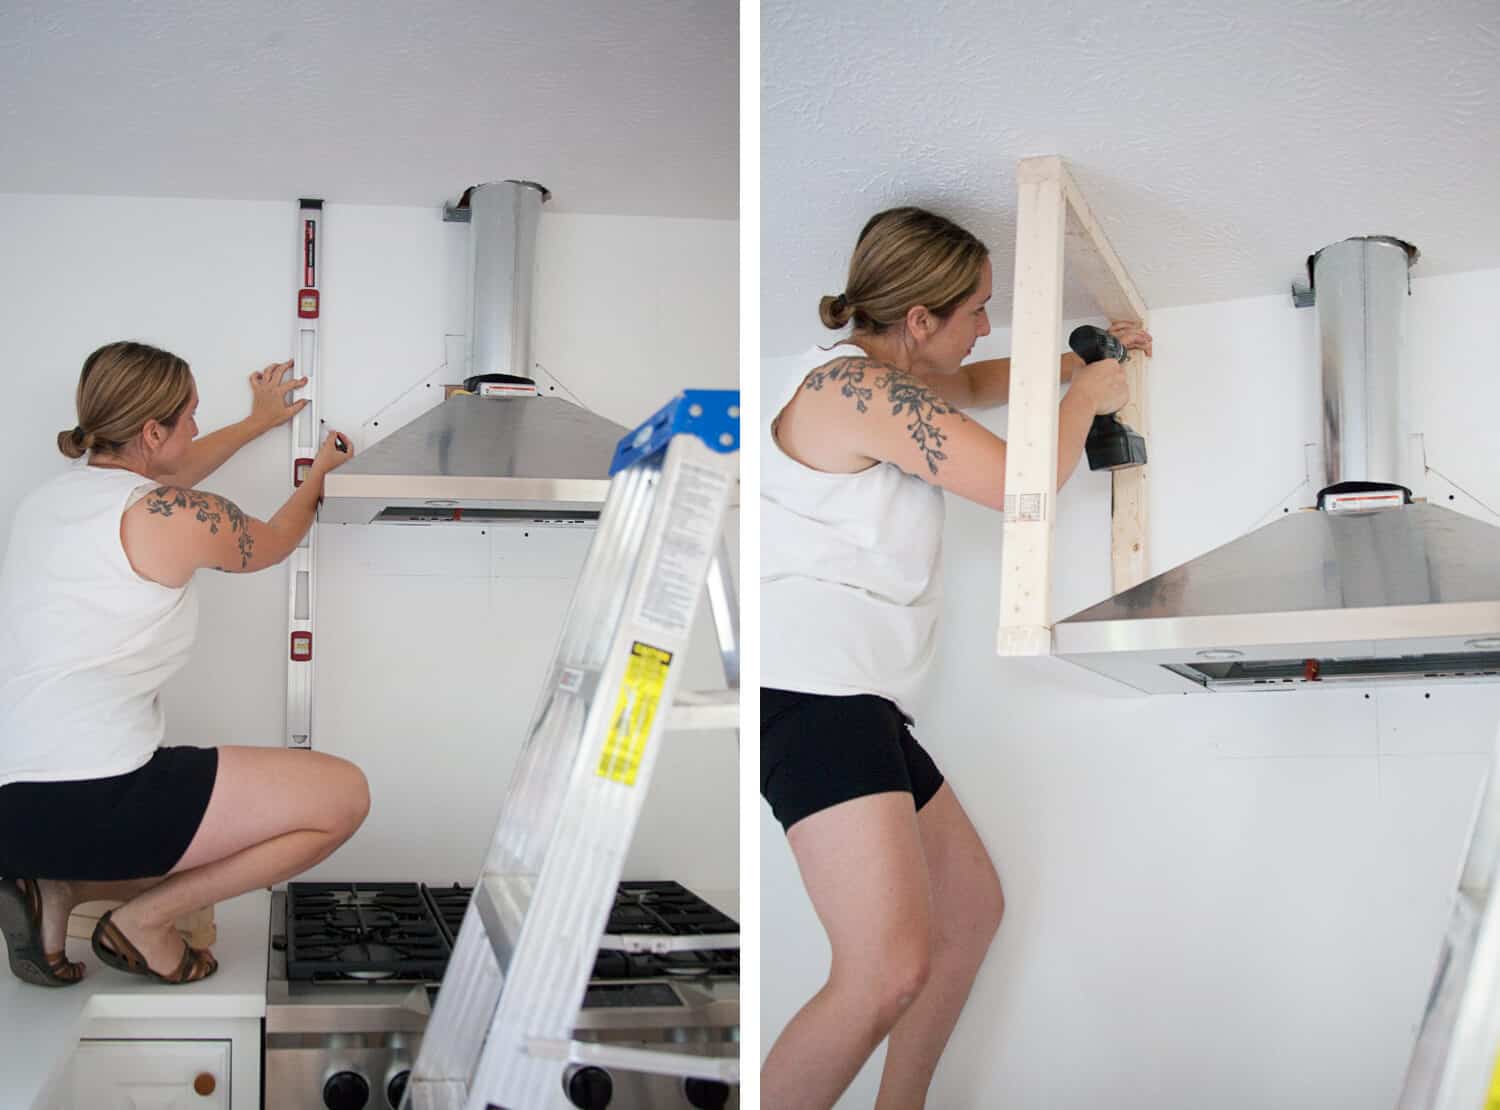 a woman measuring around the hood vent and drilling the wood frame into the wall